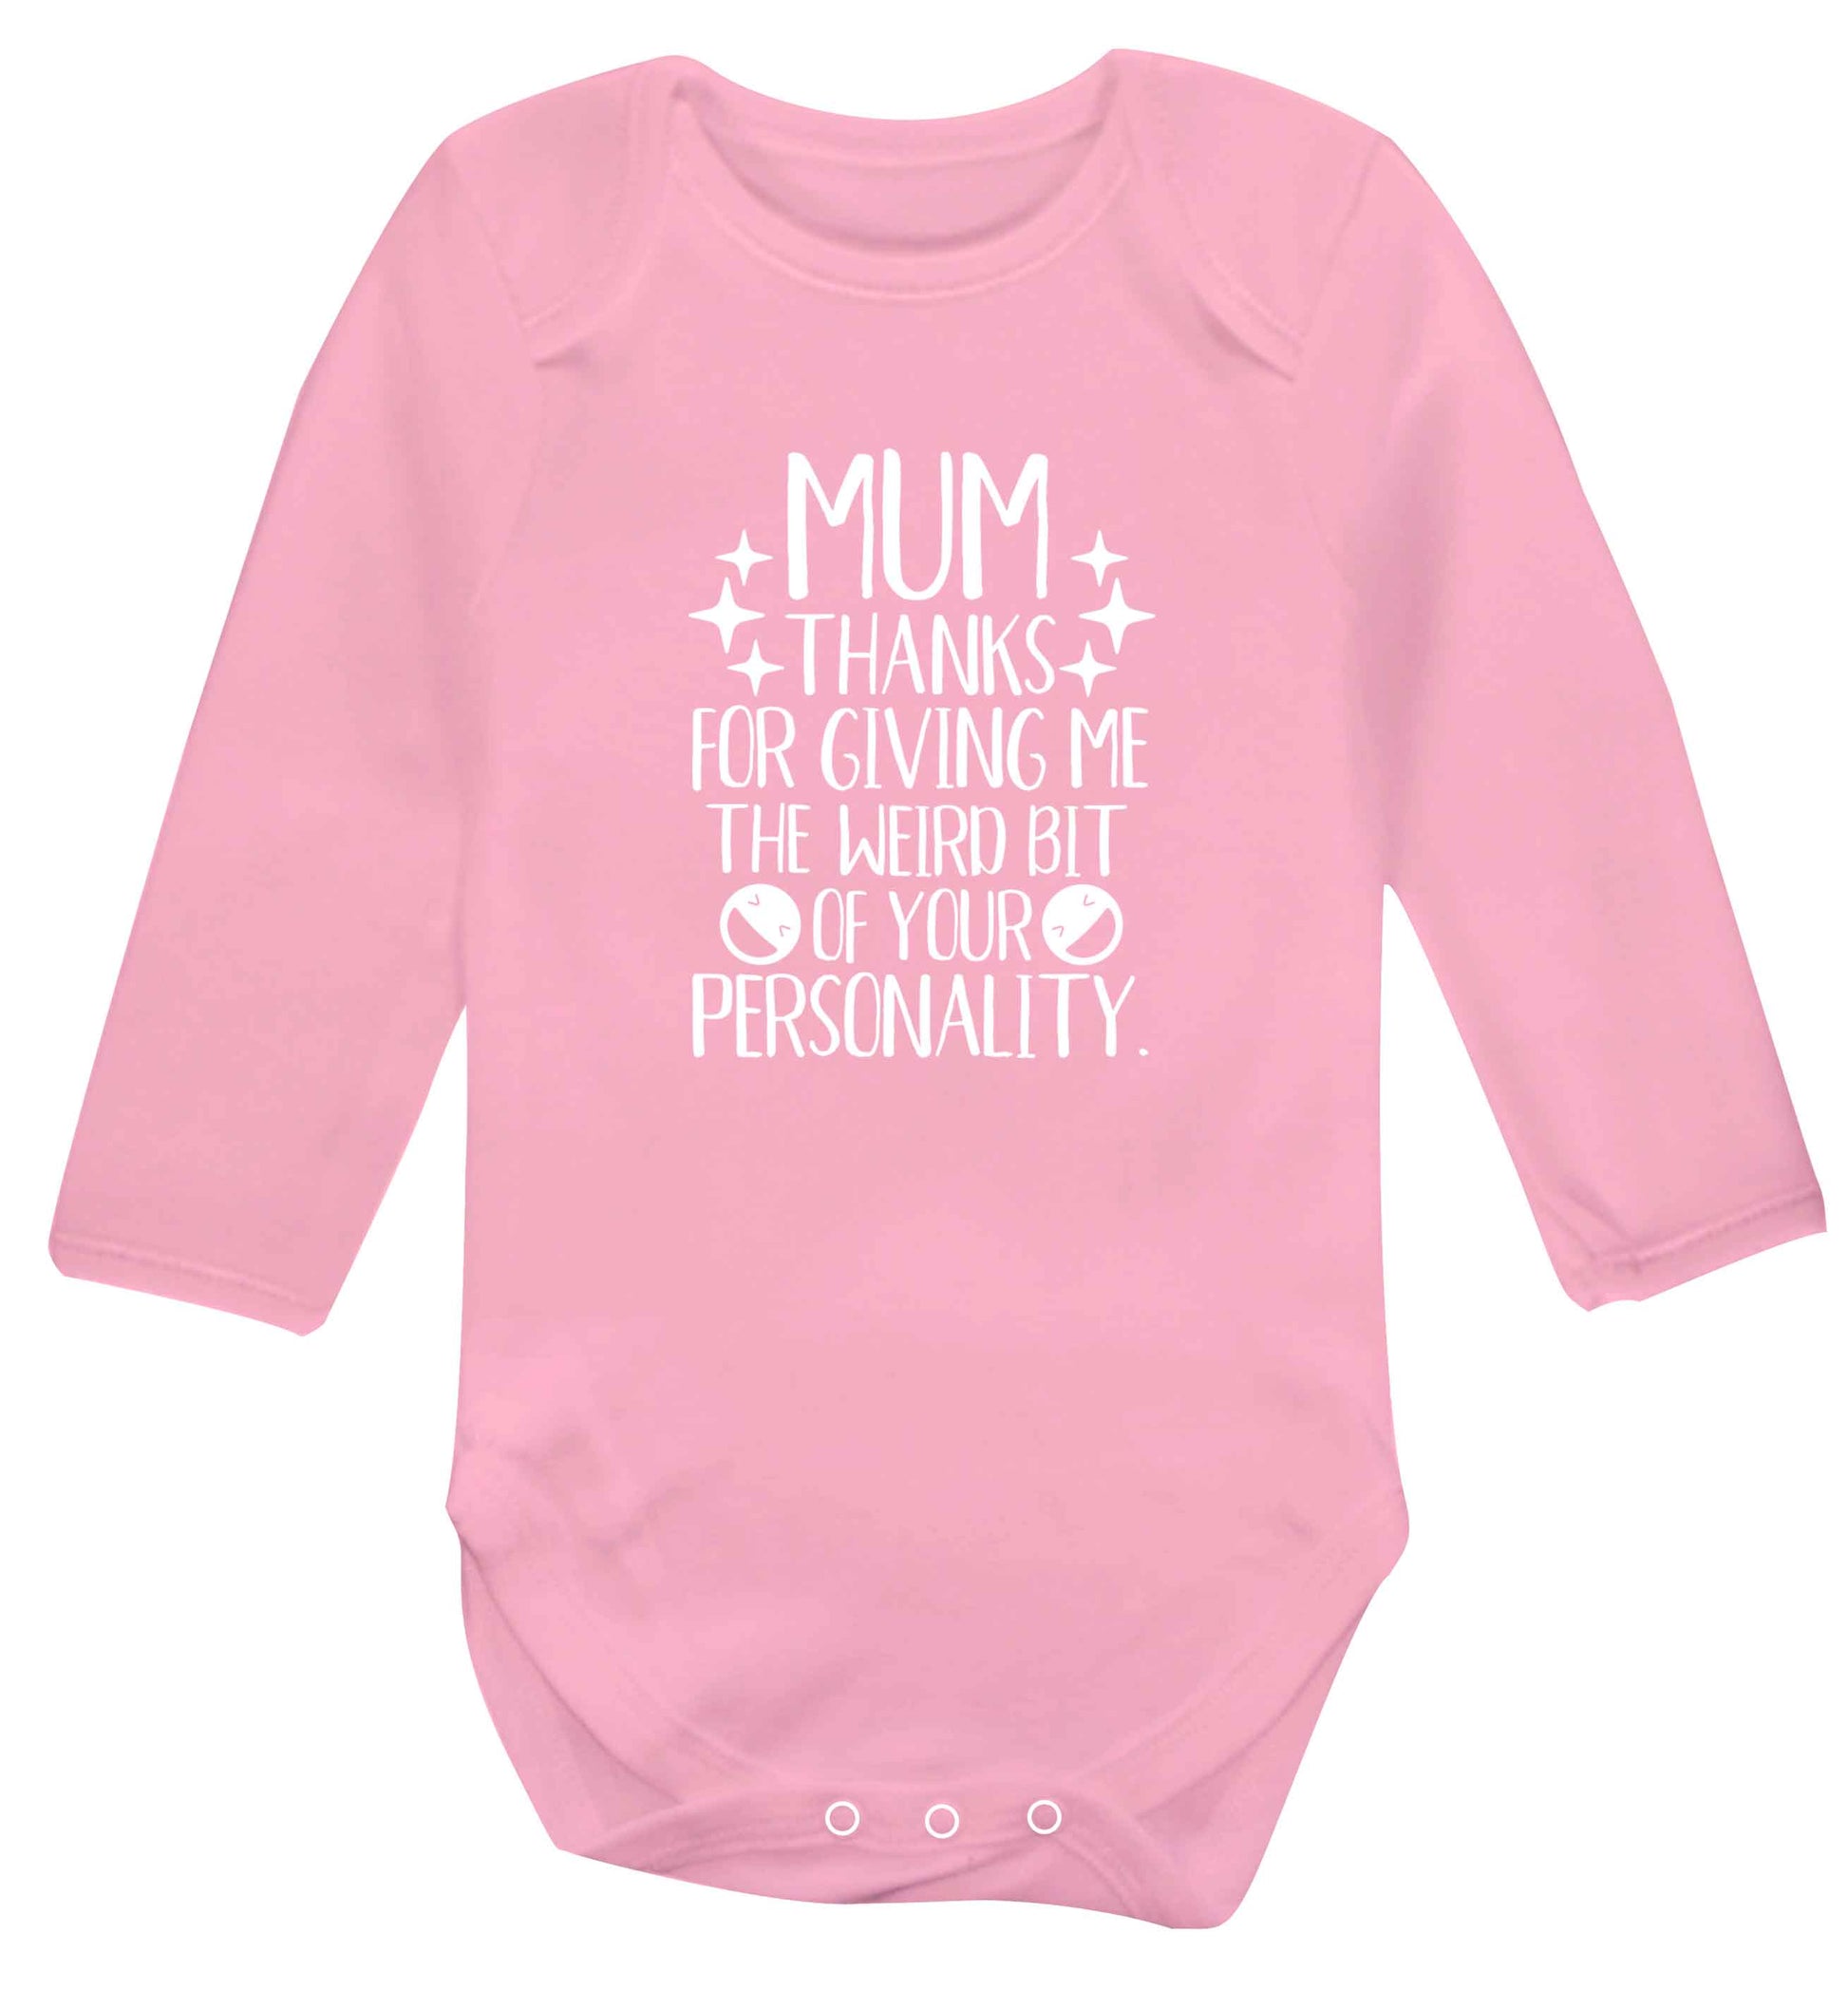 Mum thanks for giving me the weird bit of your personality baby vest long sleeved pale pink 6-12 months